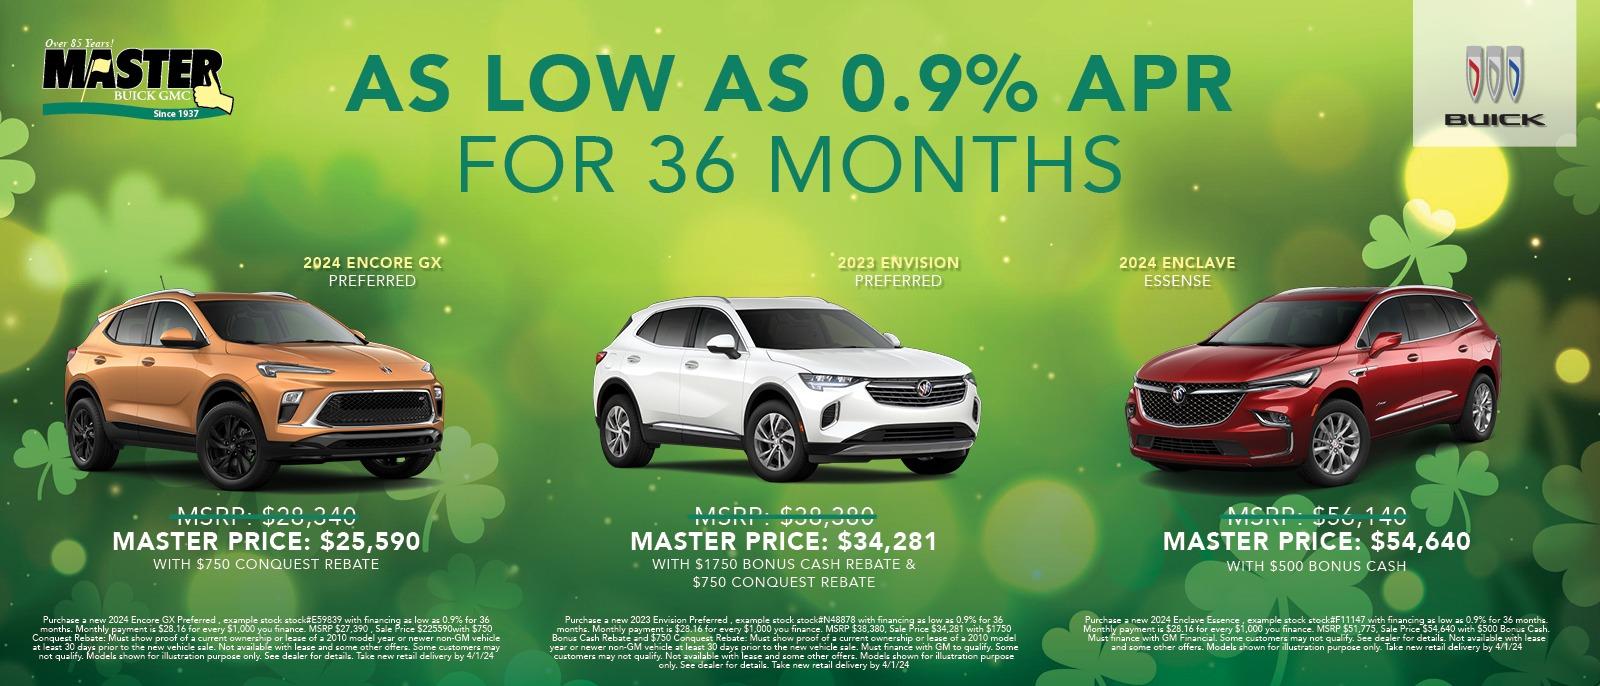 AS LOW AS 0.9% APR FOR 36 MONTHS